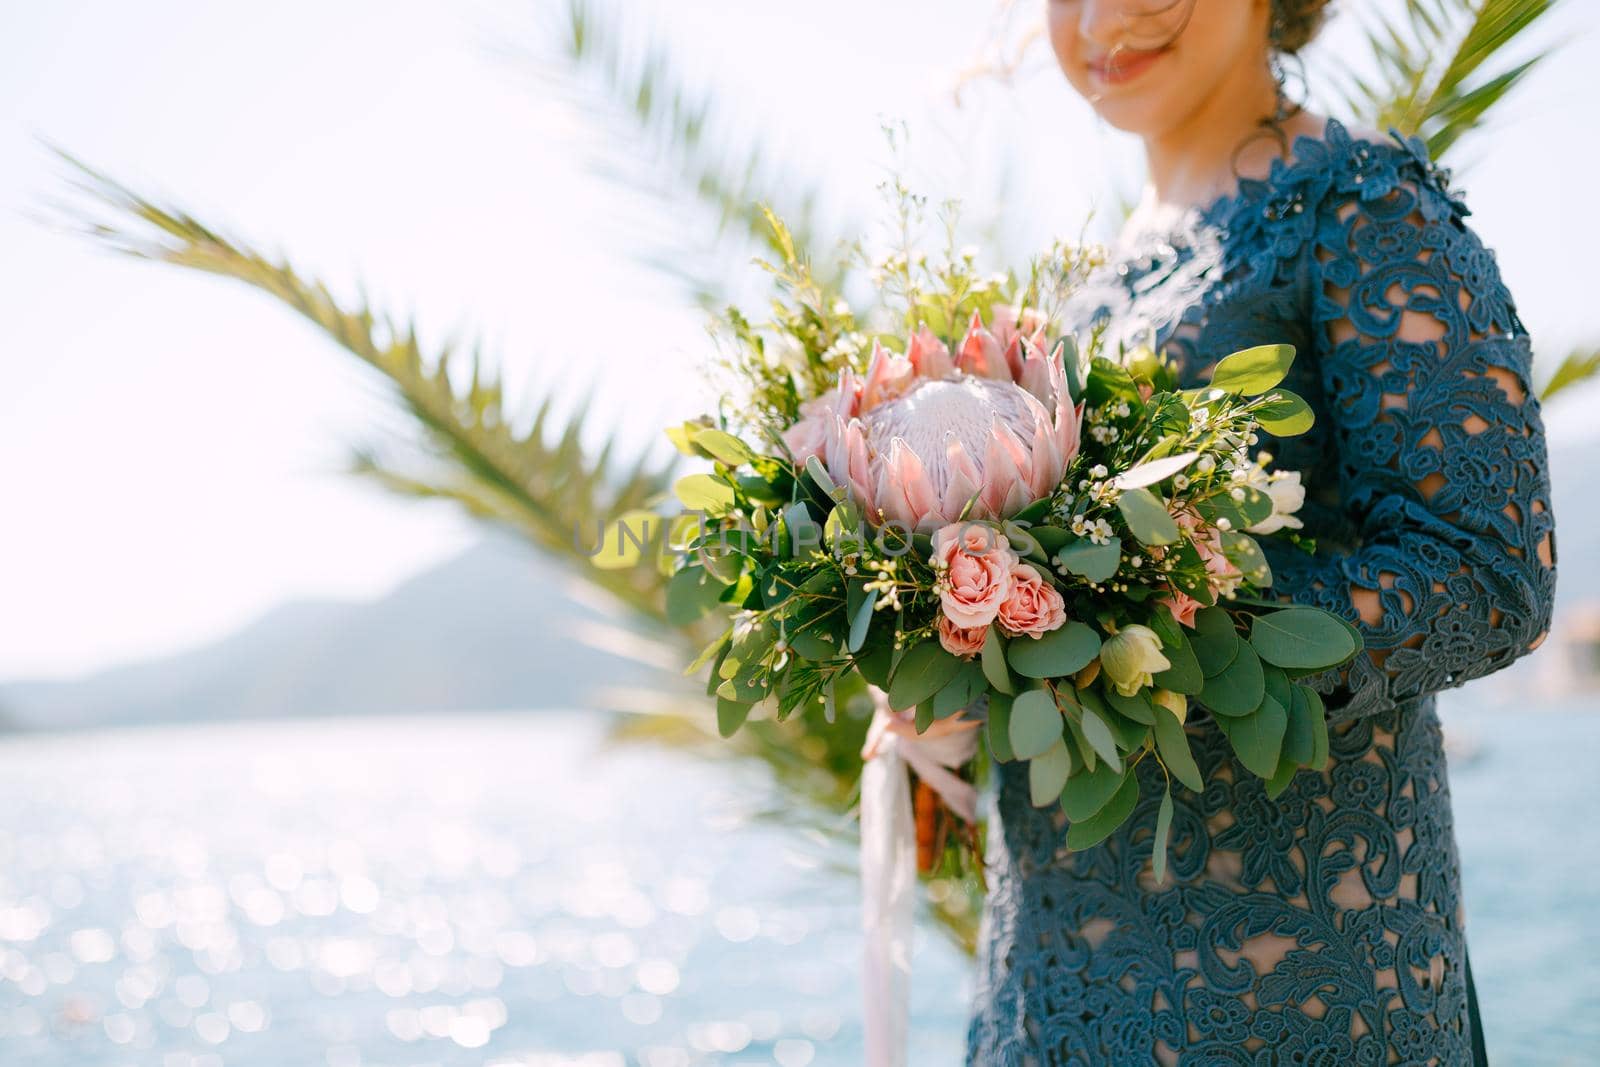 The bride in a stylish gray dress stands with wedding bouquets on the seashore, close-up by Nadtochiy